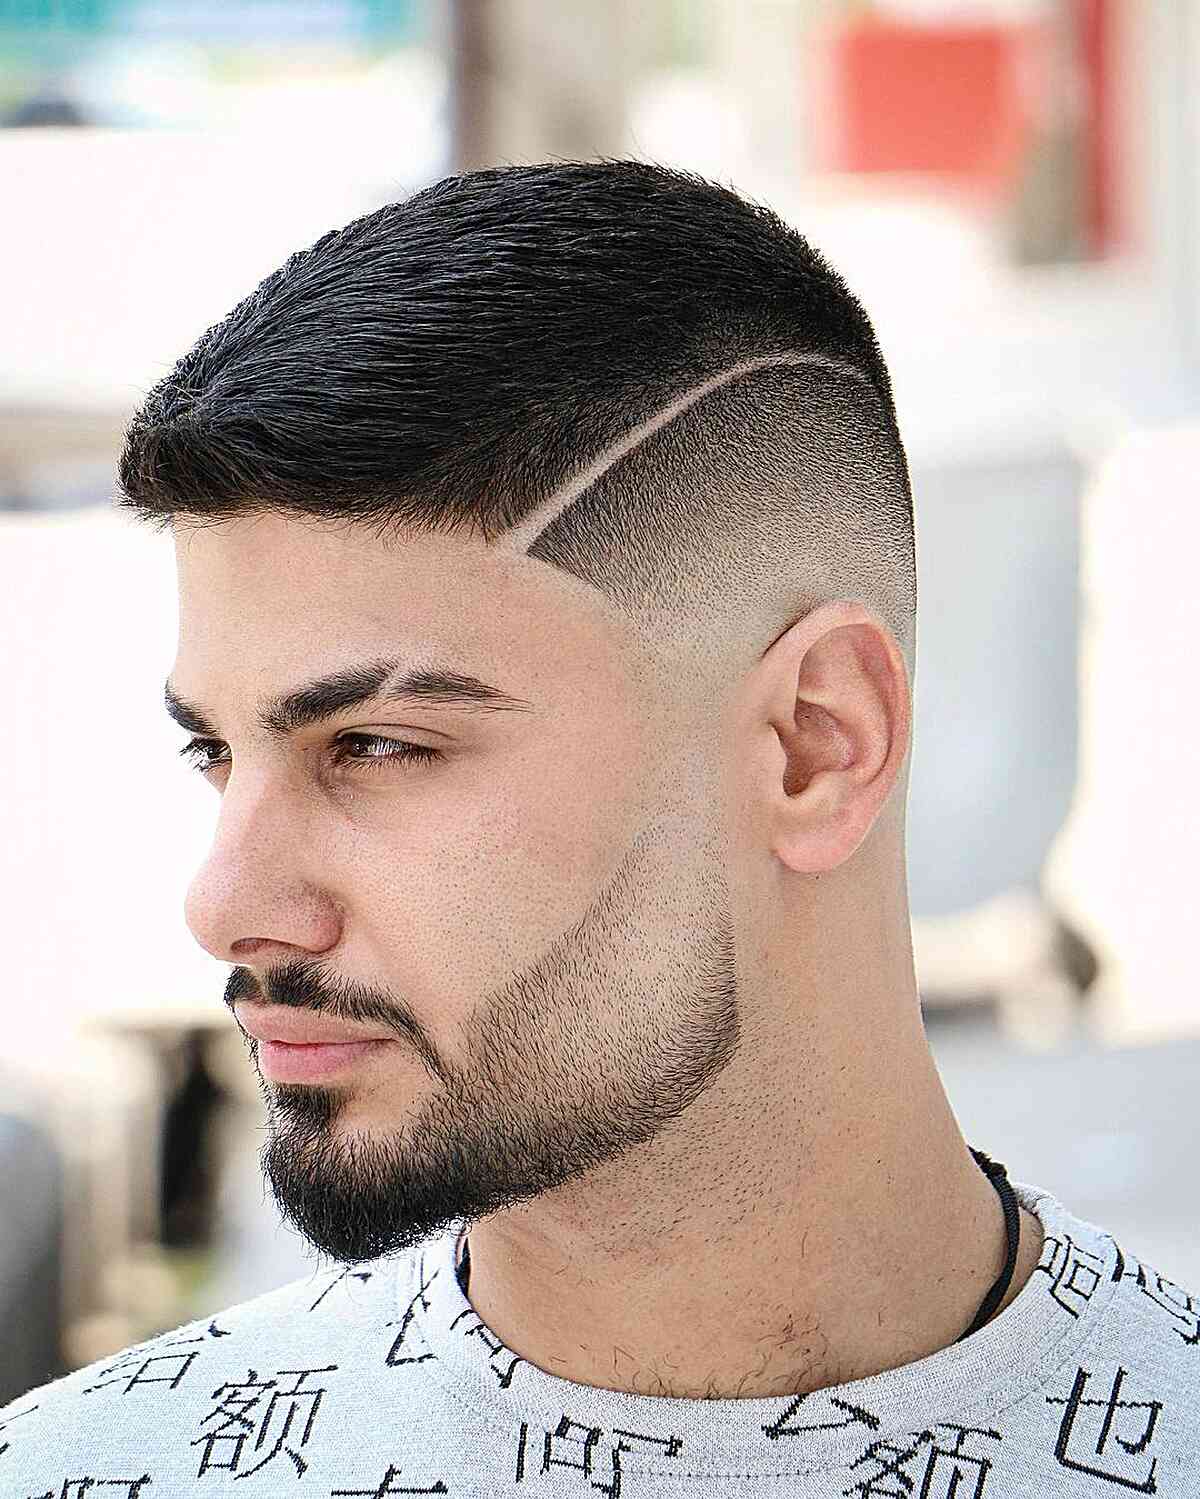 Beard Fade with a Surgical Line for Men with Short Hair